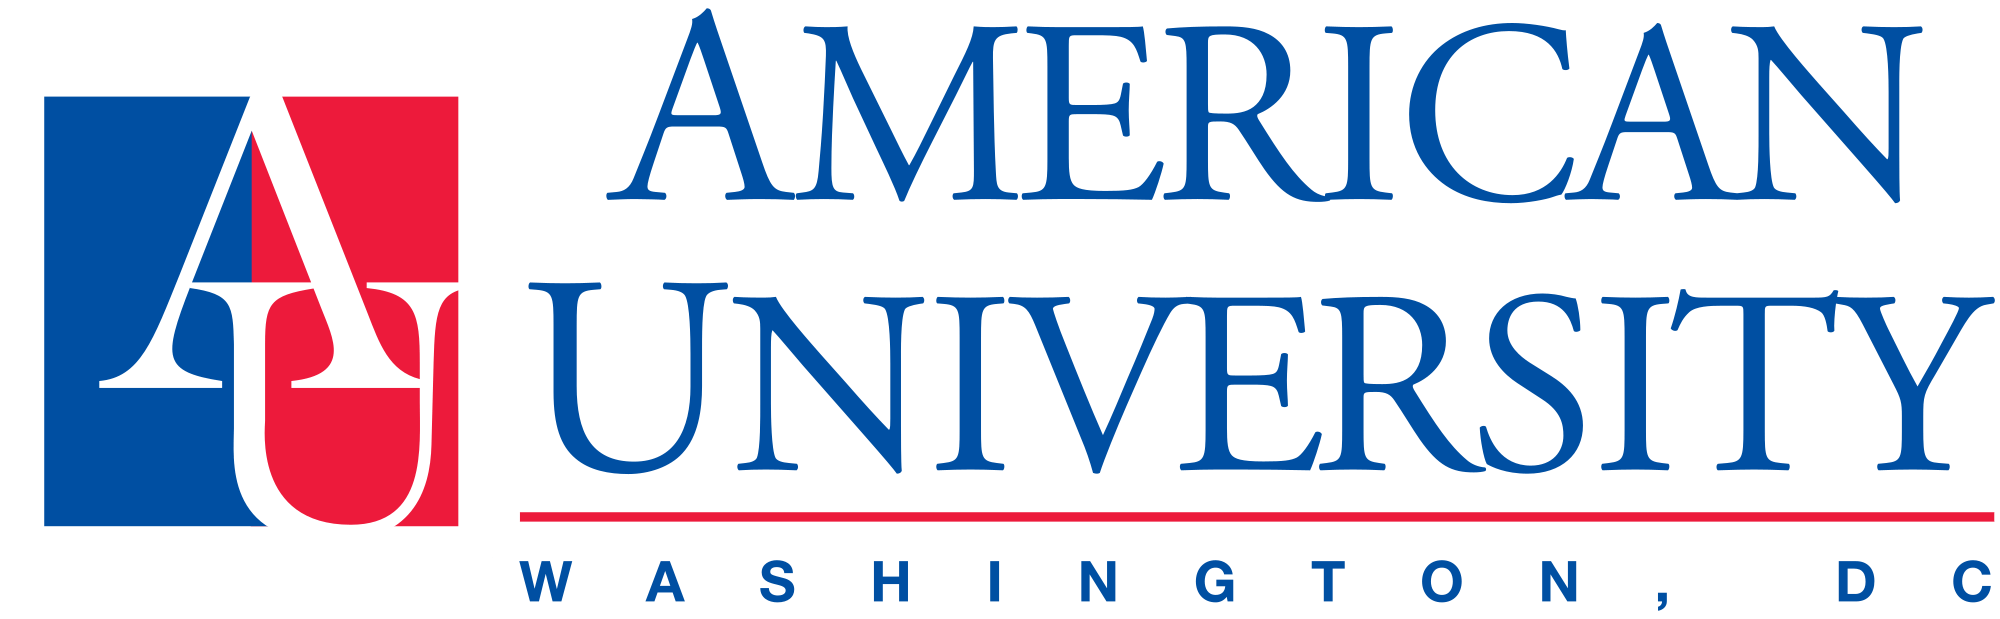 American University logo with transparent background